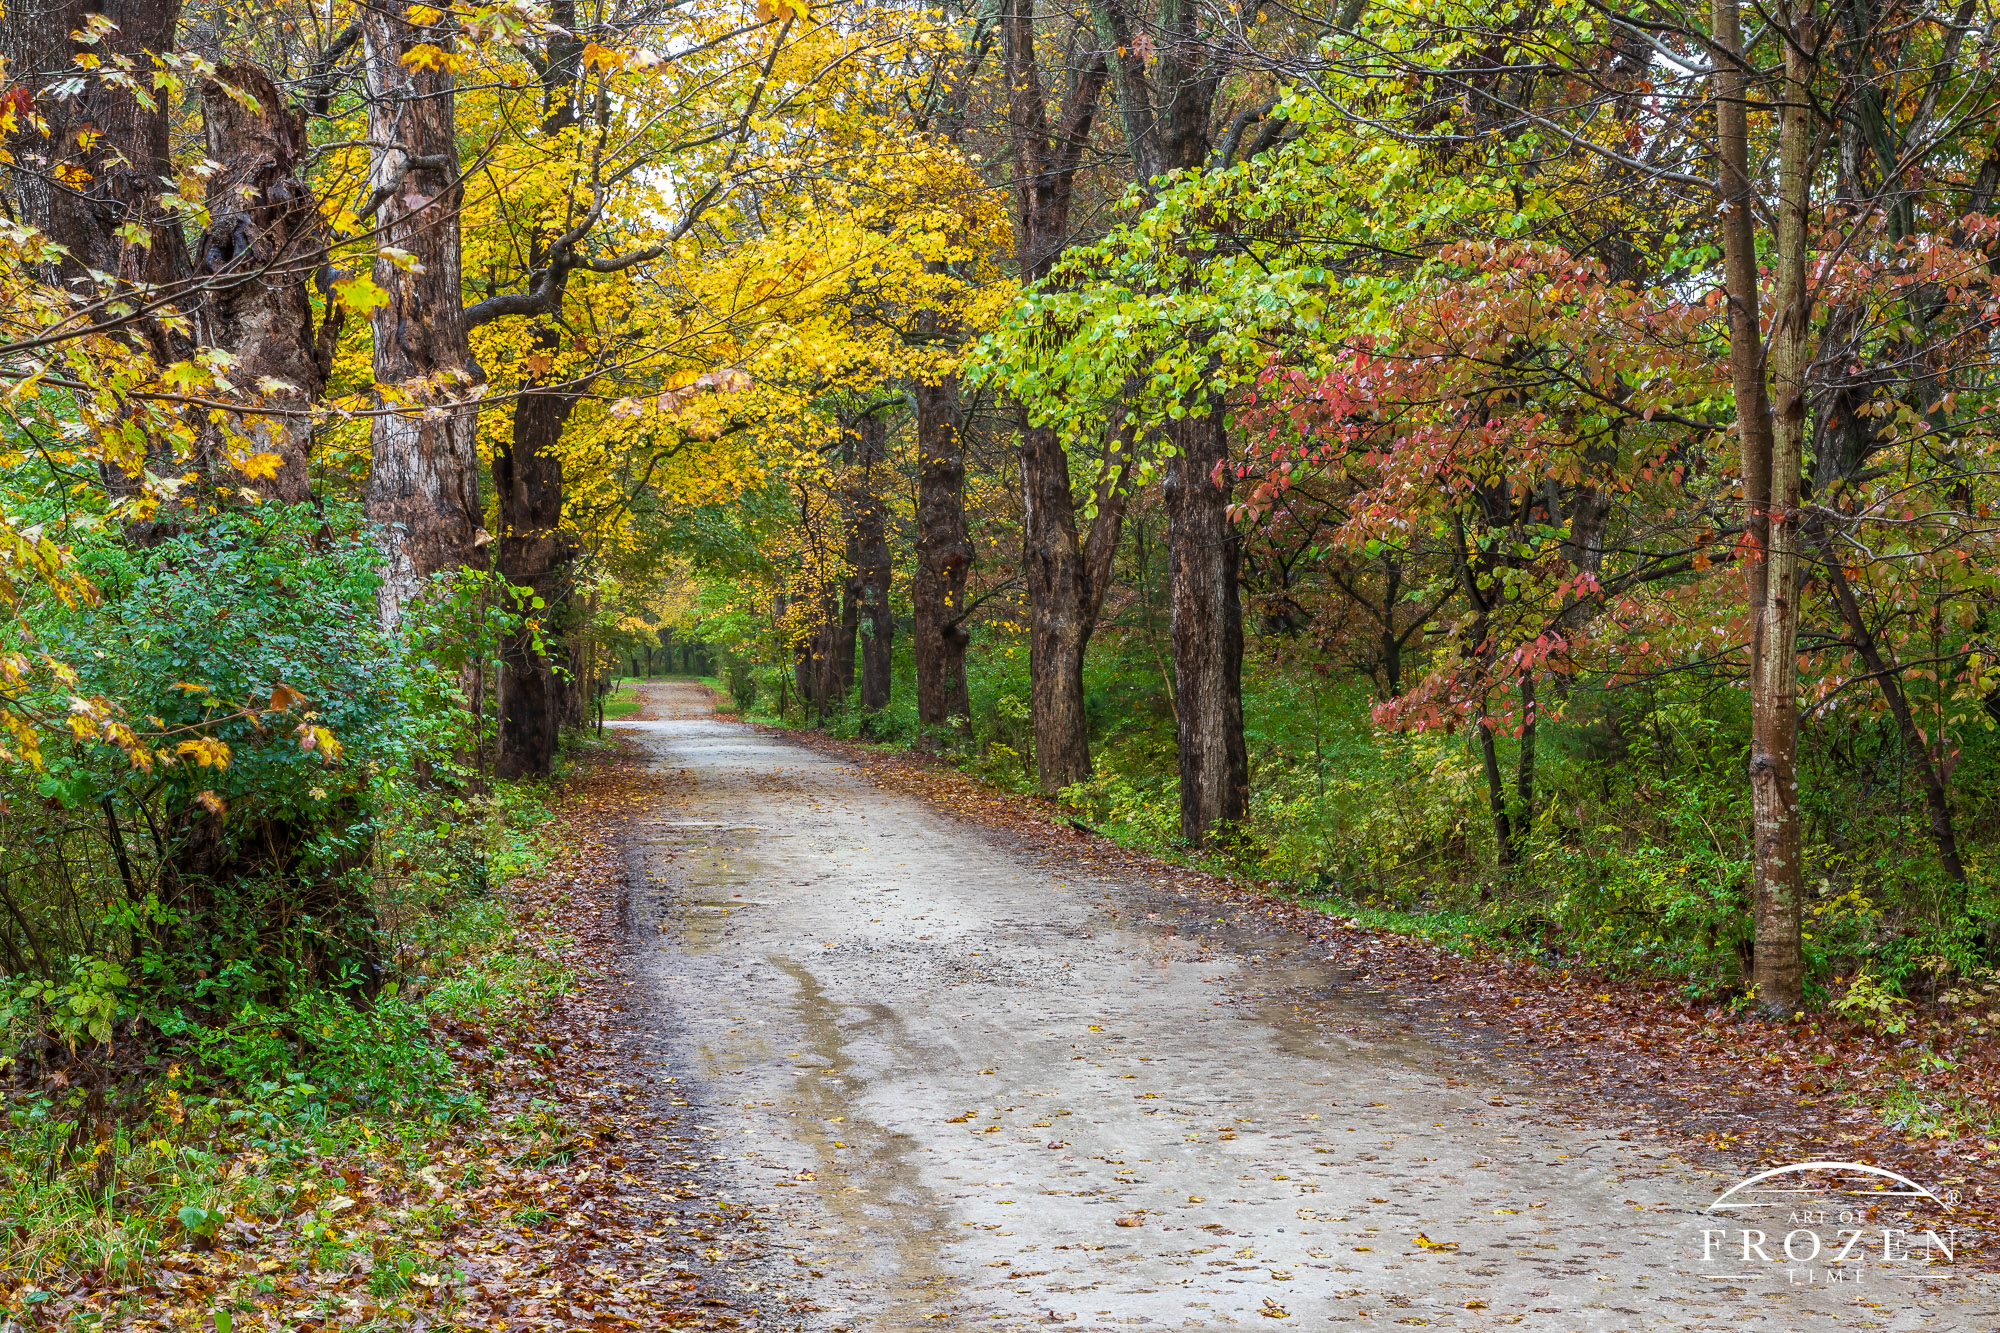 A view down a gravel road during a rainy fall evening with yellow sugar maple trees added their own colorful accents